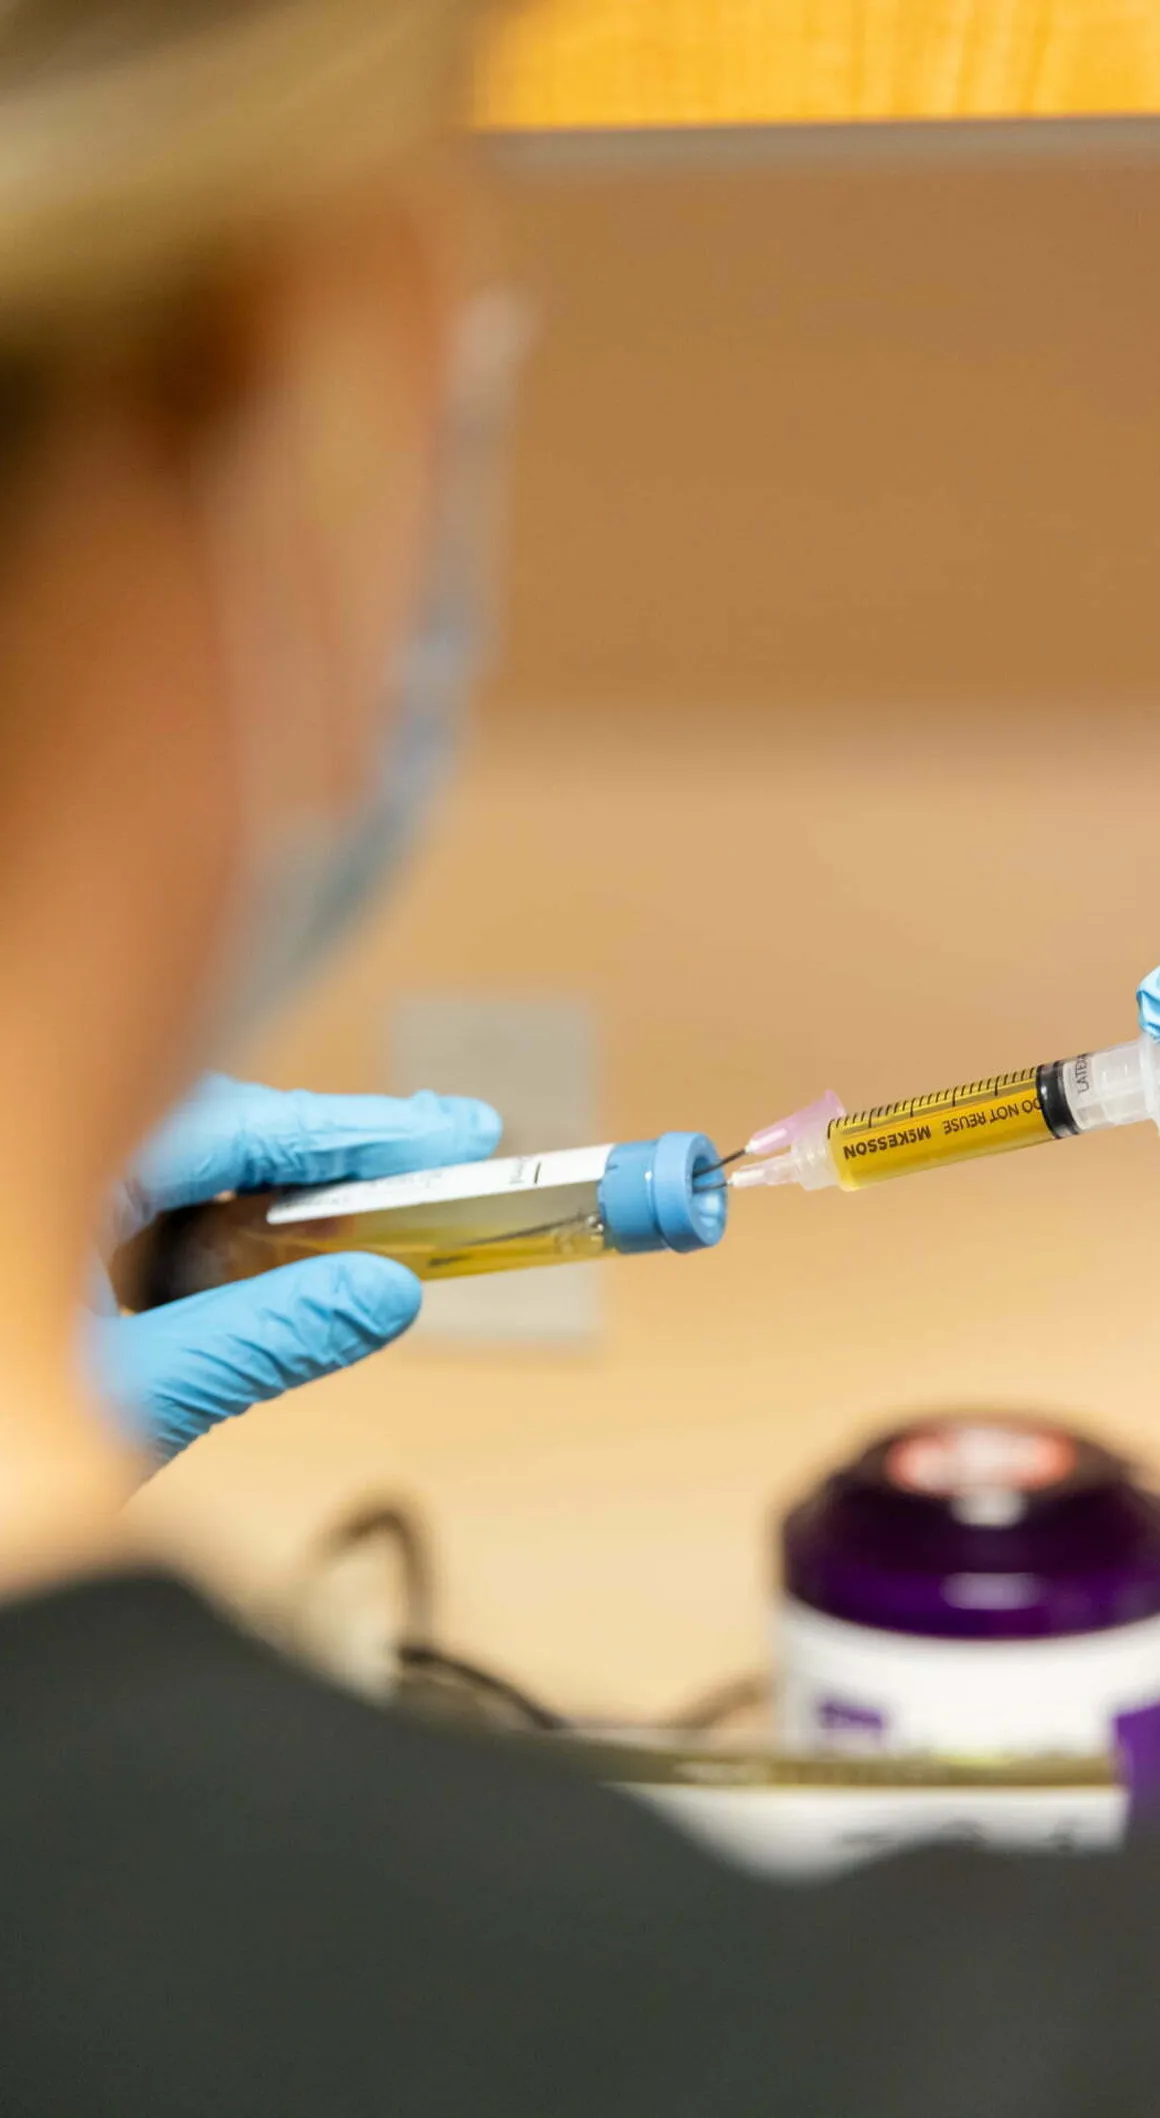 A Sexual Health Expert in Los Angeles, wearing gloves, is preparing a syringe for administration, with a focus on the precise measurement of the vaccine or medication.